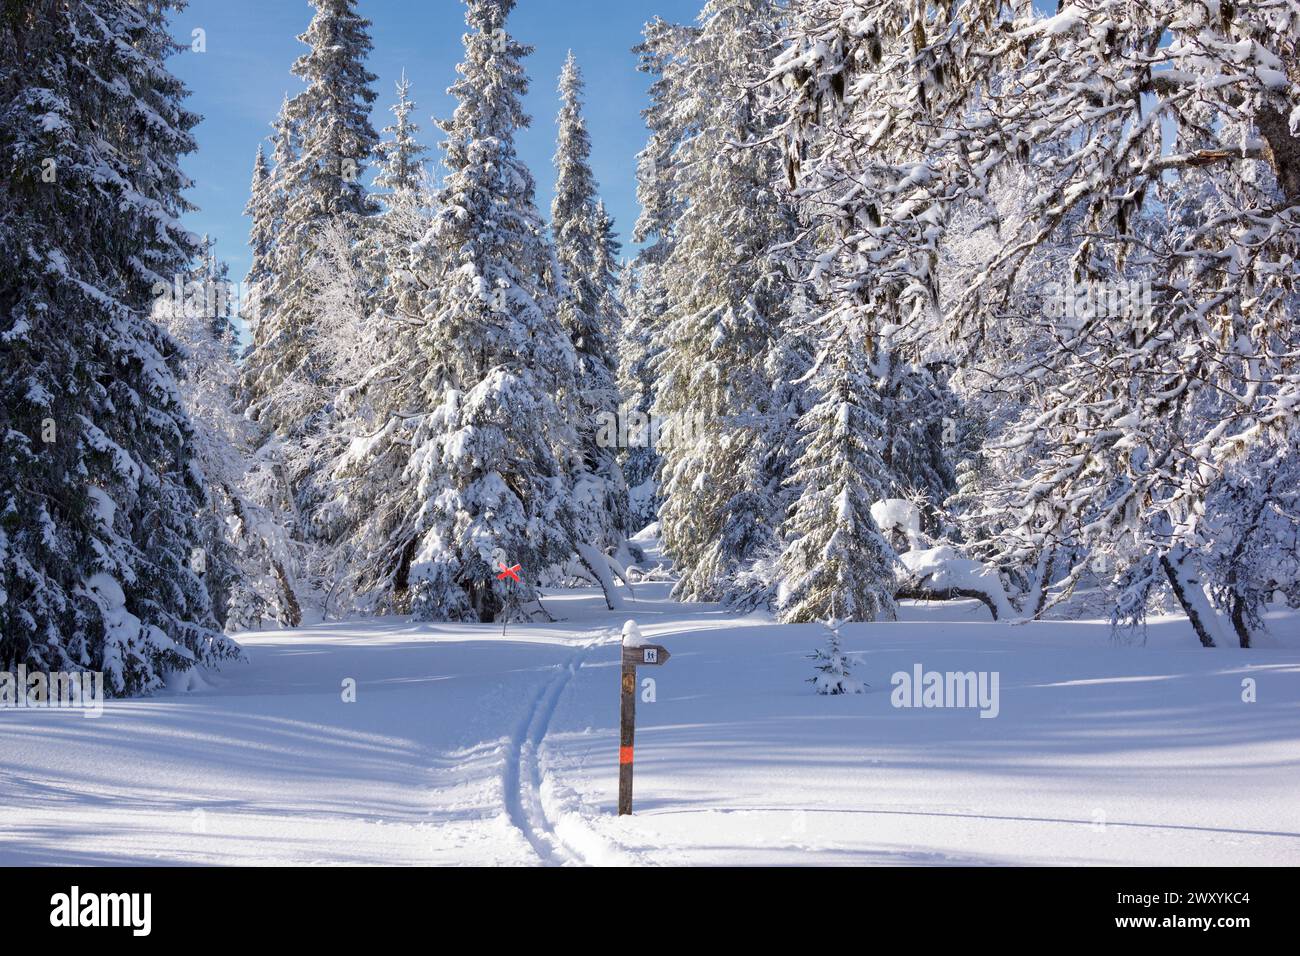 Cross country skiing slopes running through an idyllic winter forest with snow capped trees Stock Photo